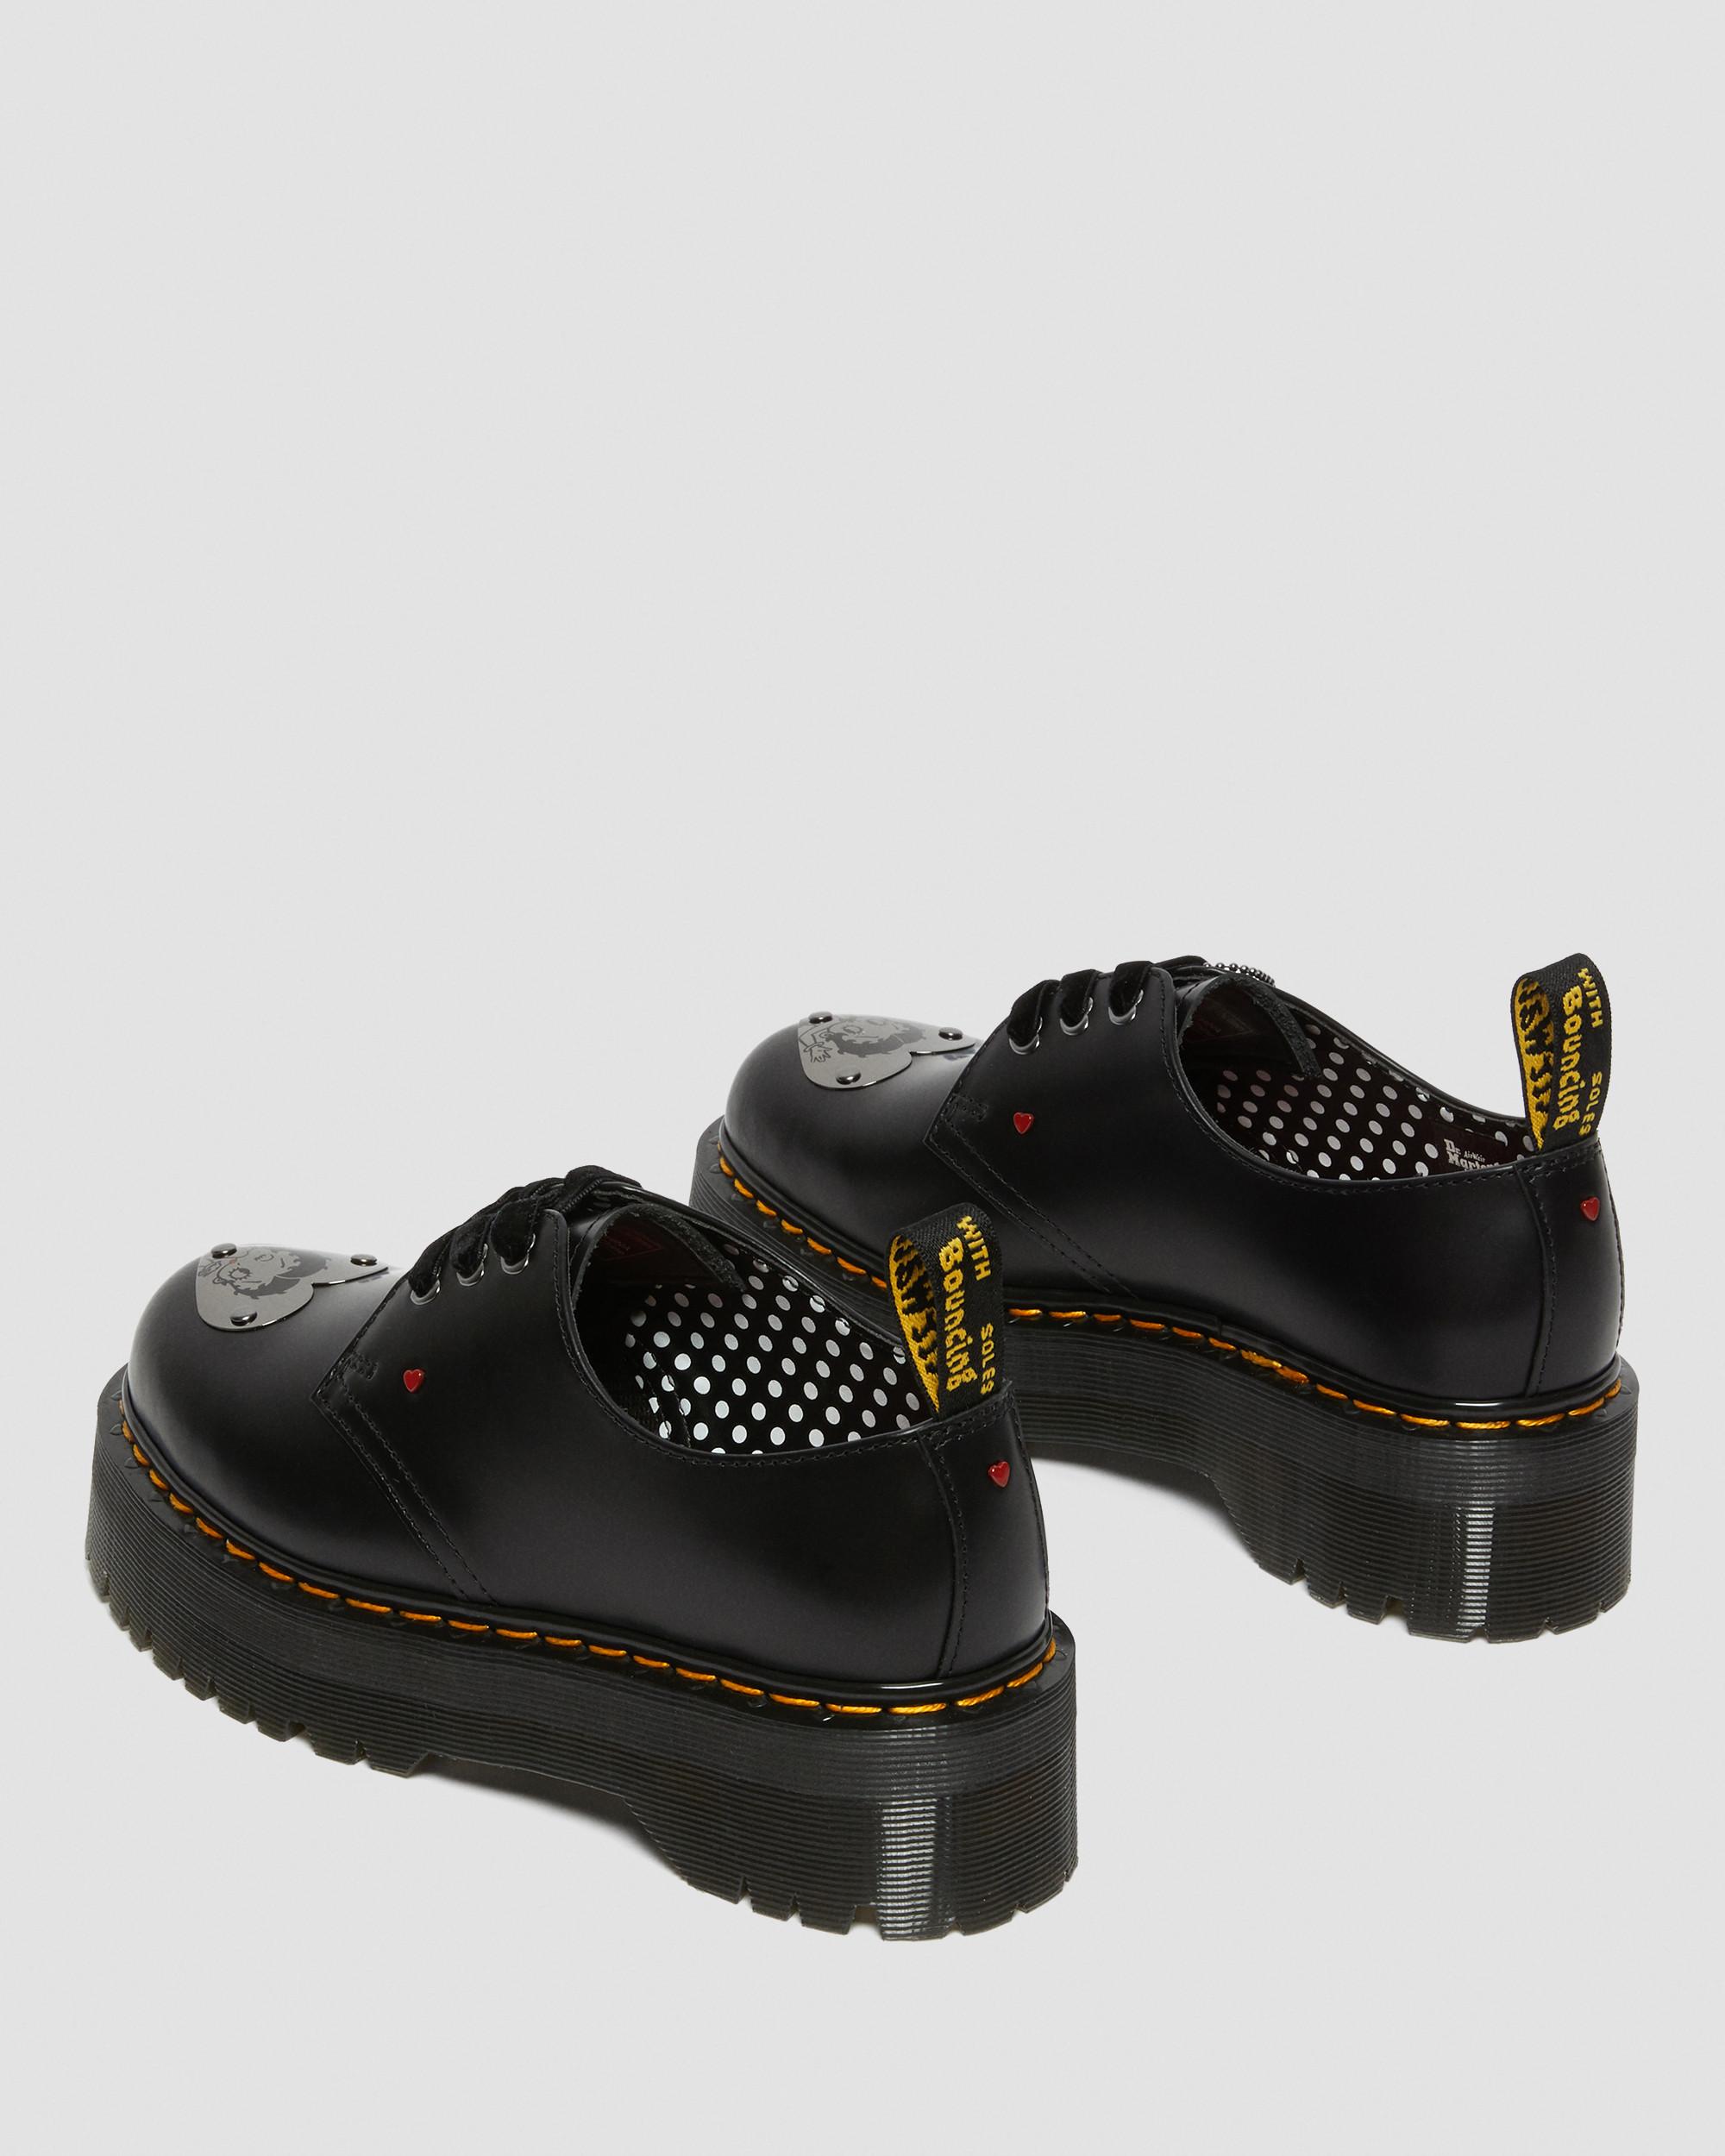 1461 Betty Boop Leather Platform Shoes in Black | Dr. Martens